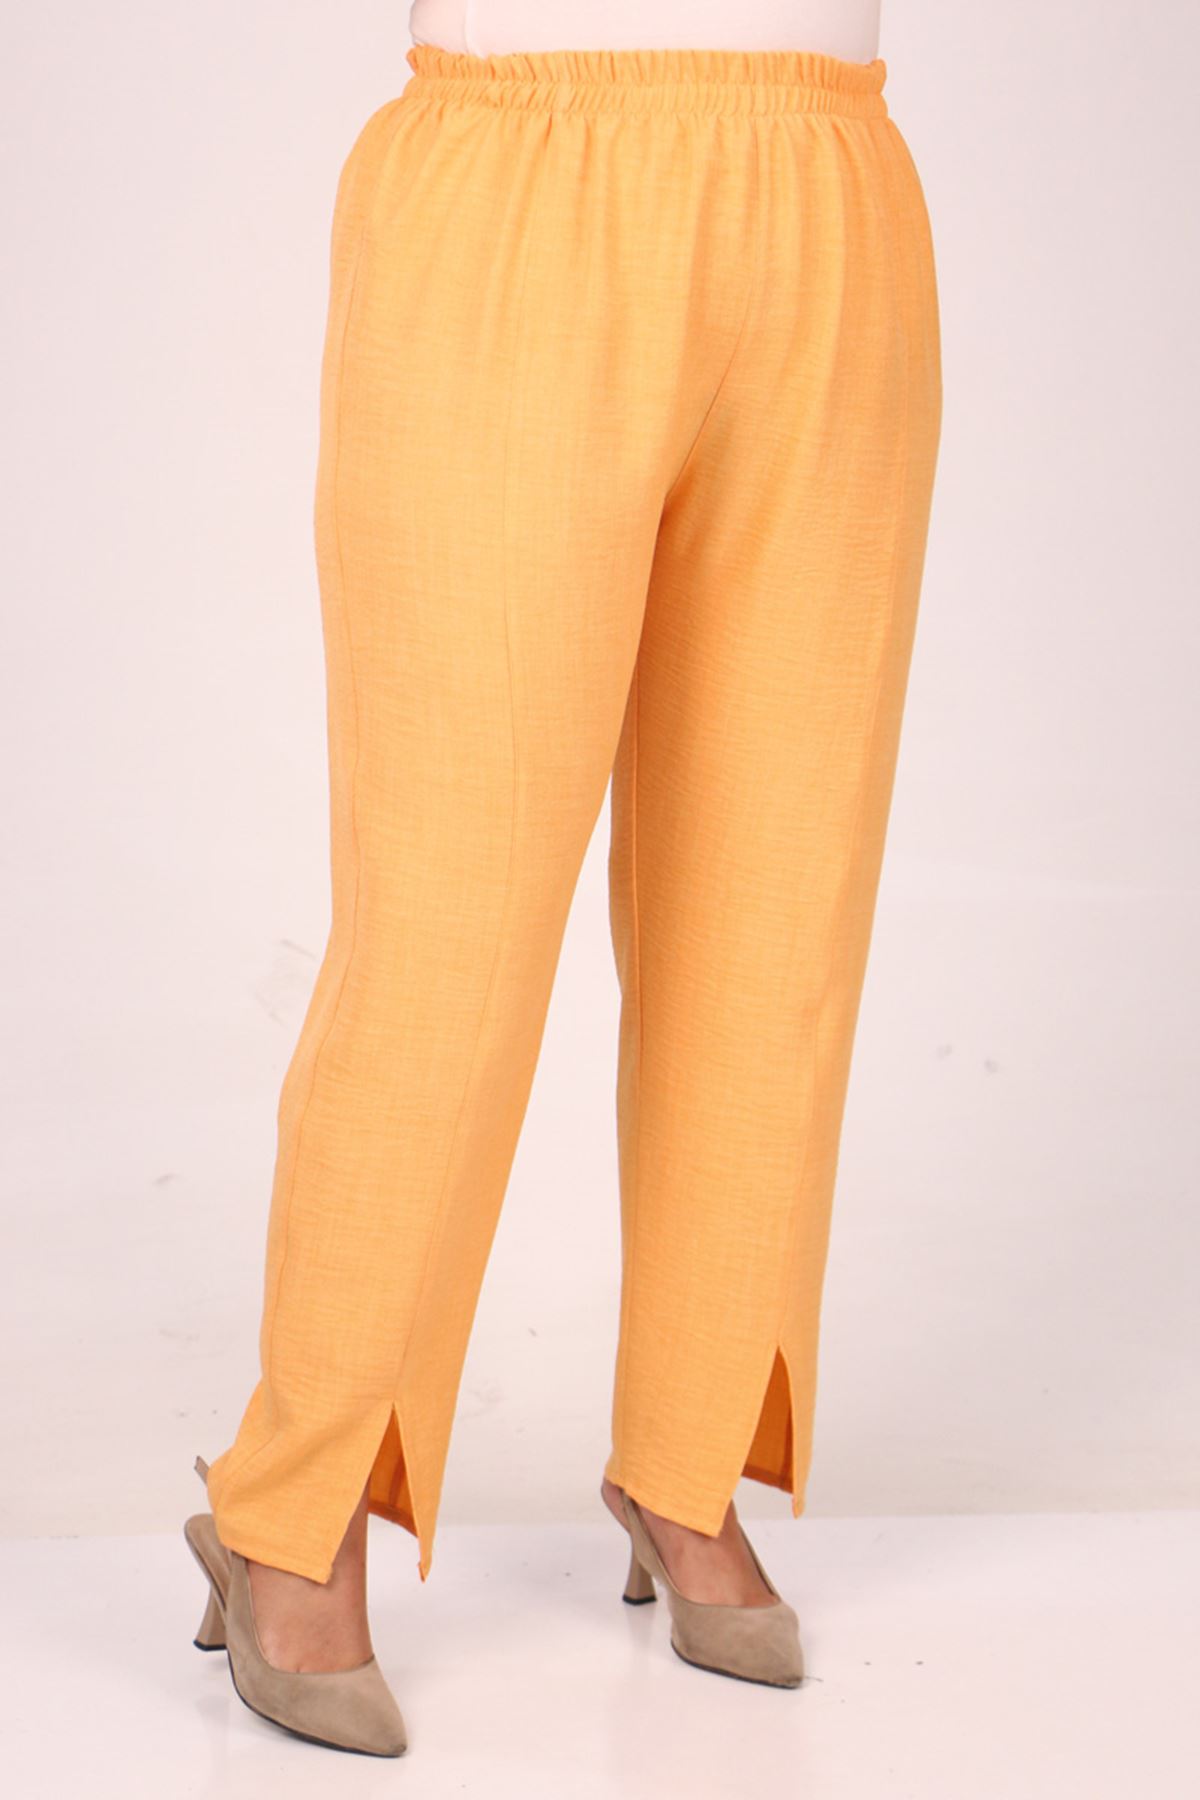 37036 Large Size Linen Airobin Stone Printed Trousers Suit -Yellow